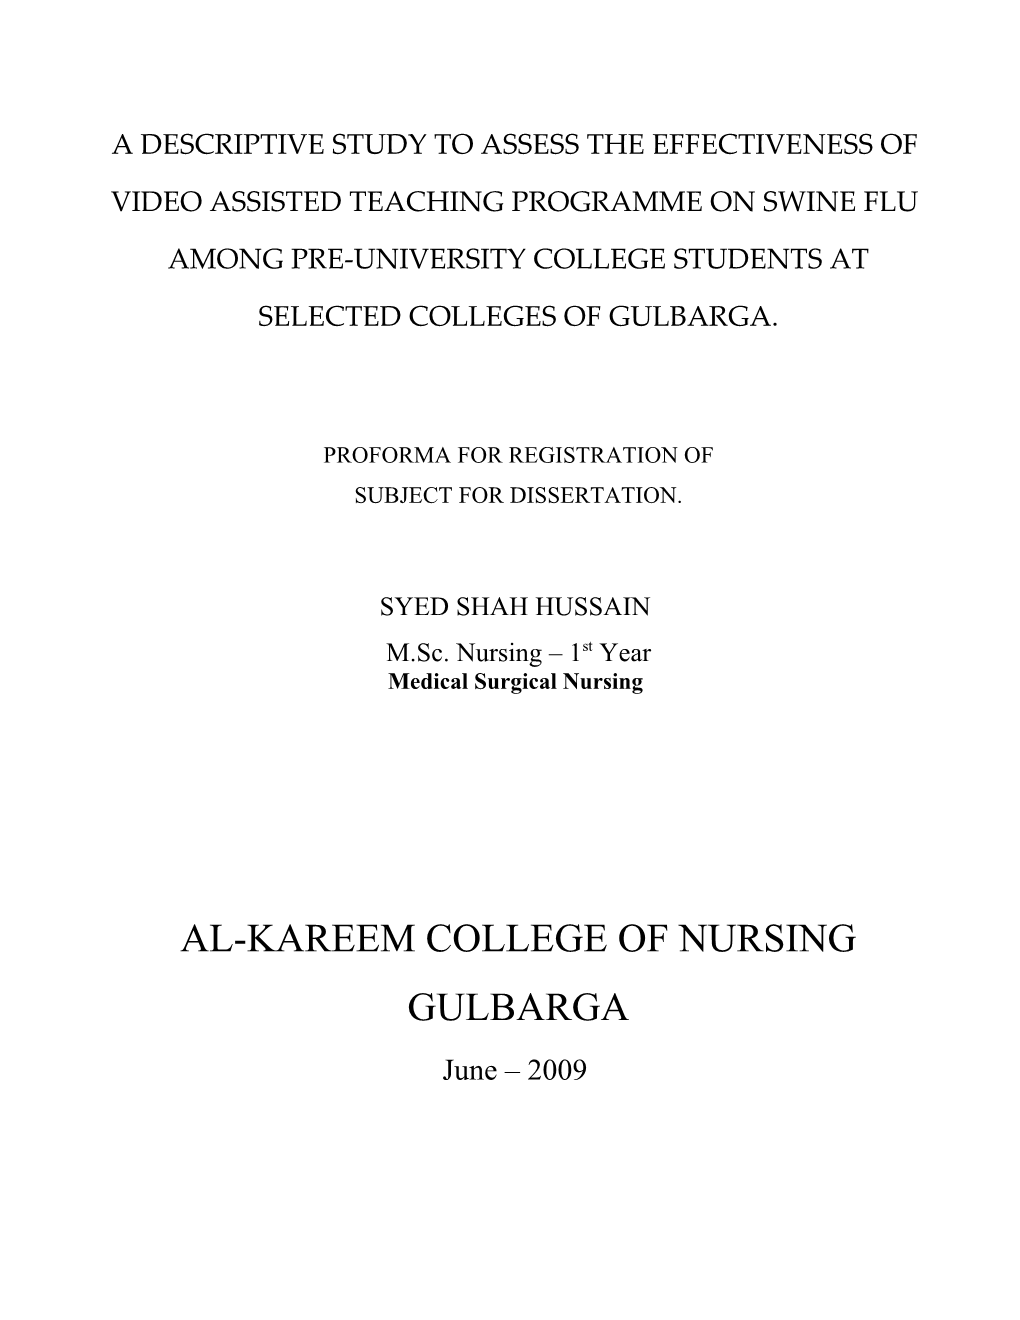 A Descriptive Study to Evaluate the Effectiveness of Video Assisted Teaching Programme